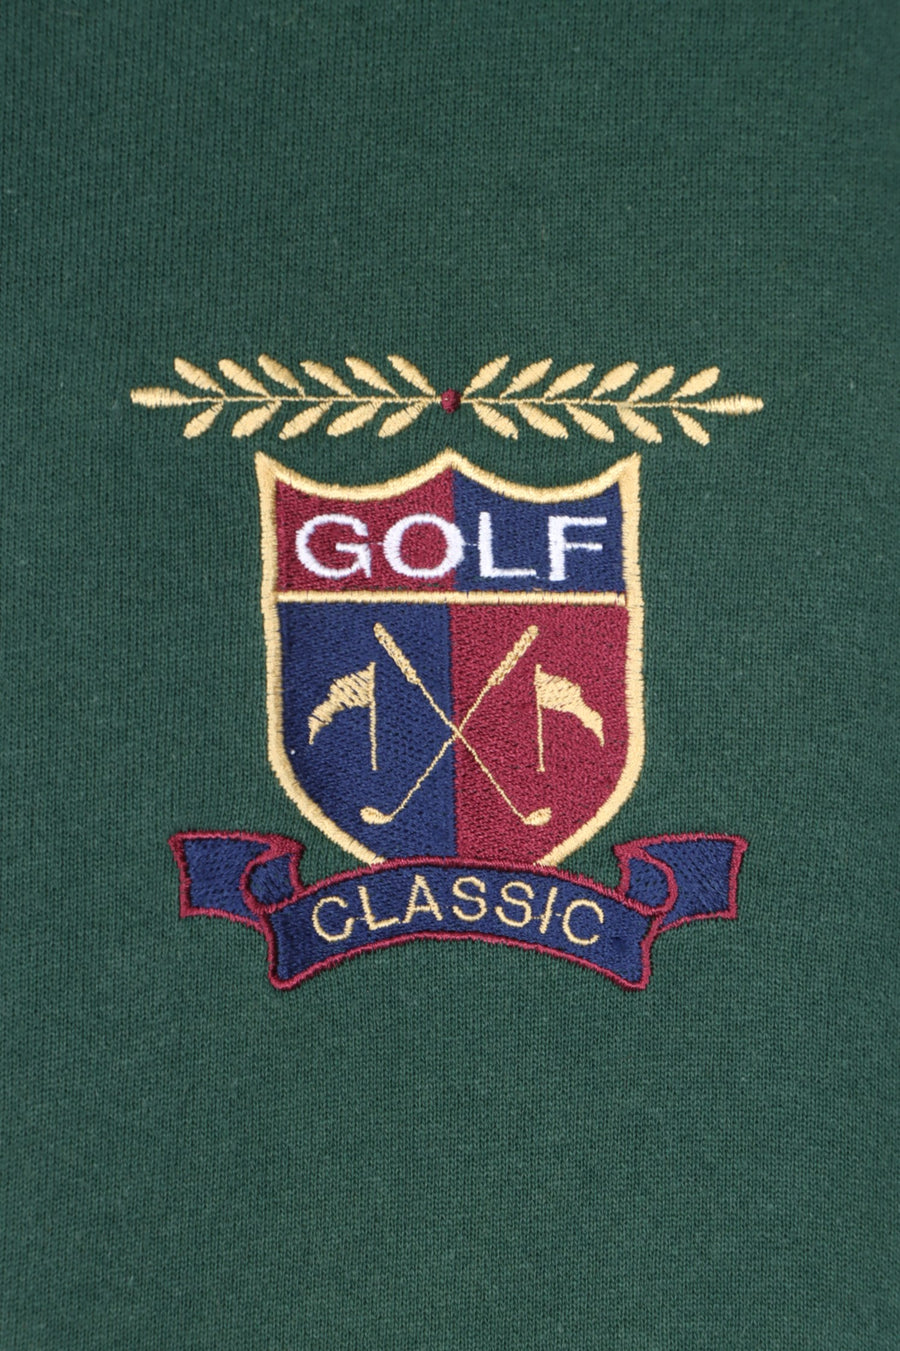 Golf Classic Embroidered Crest Shield Ringer Sweatshirt USA Made (L-XL)